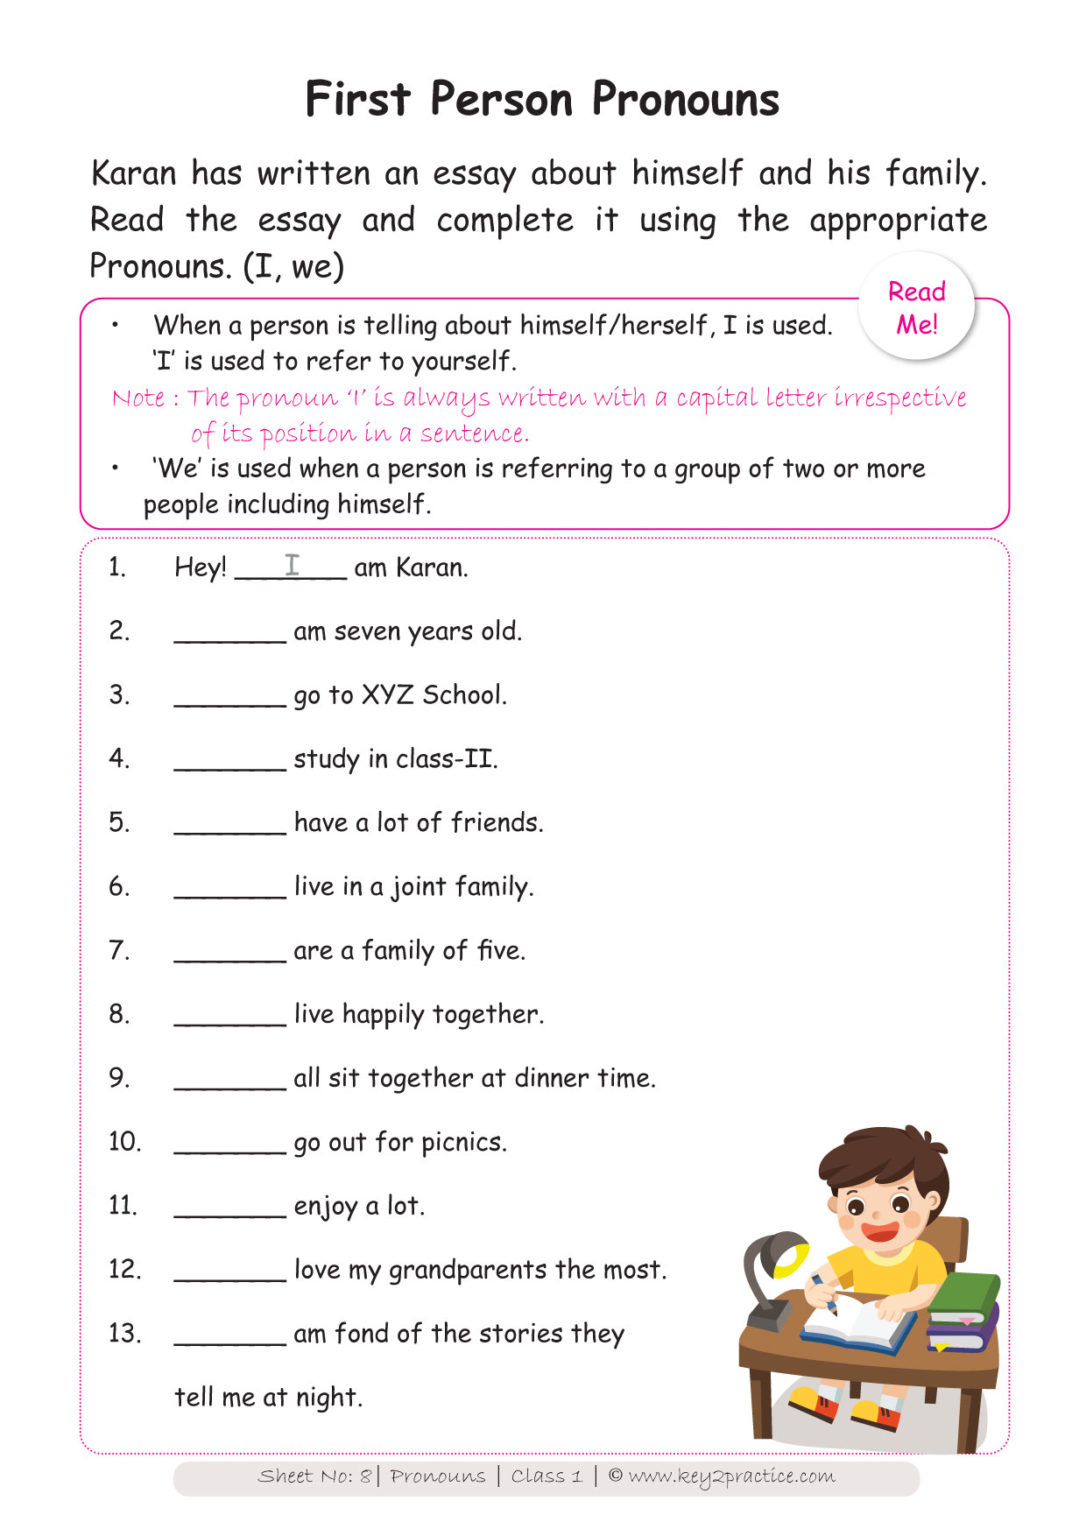 Adverb Worksheet For Class 3 With Answers Worksheets Class 3 English Worksheets I Adjectives